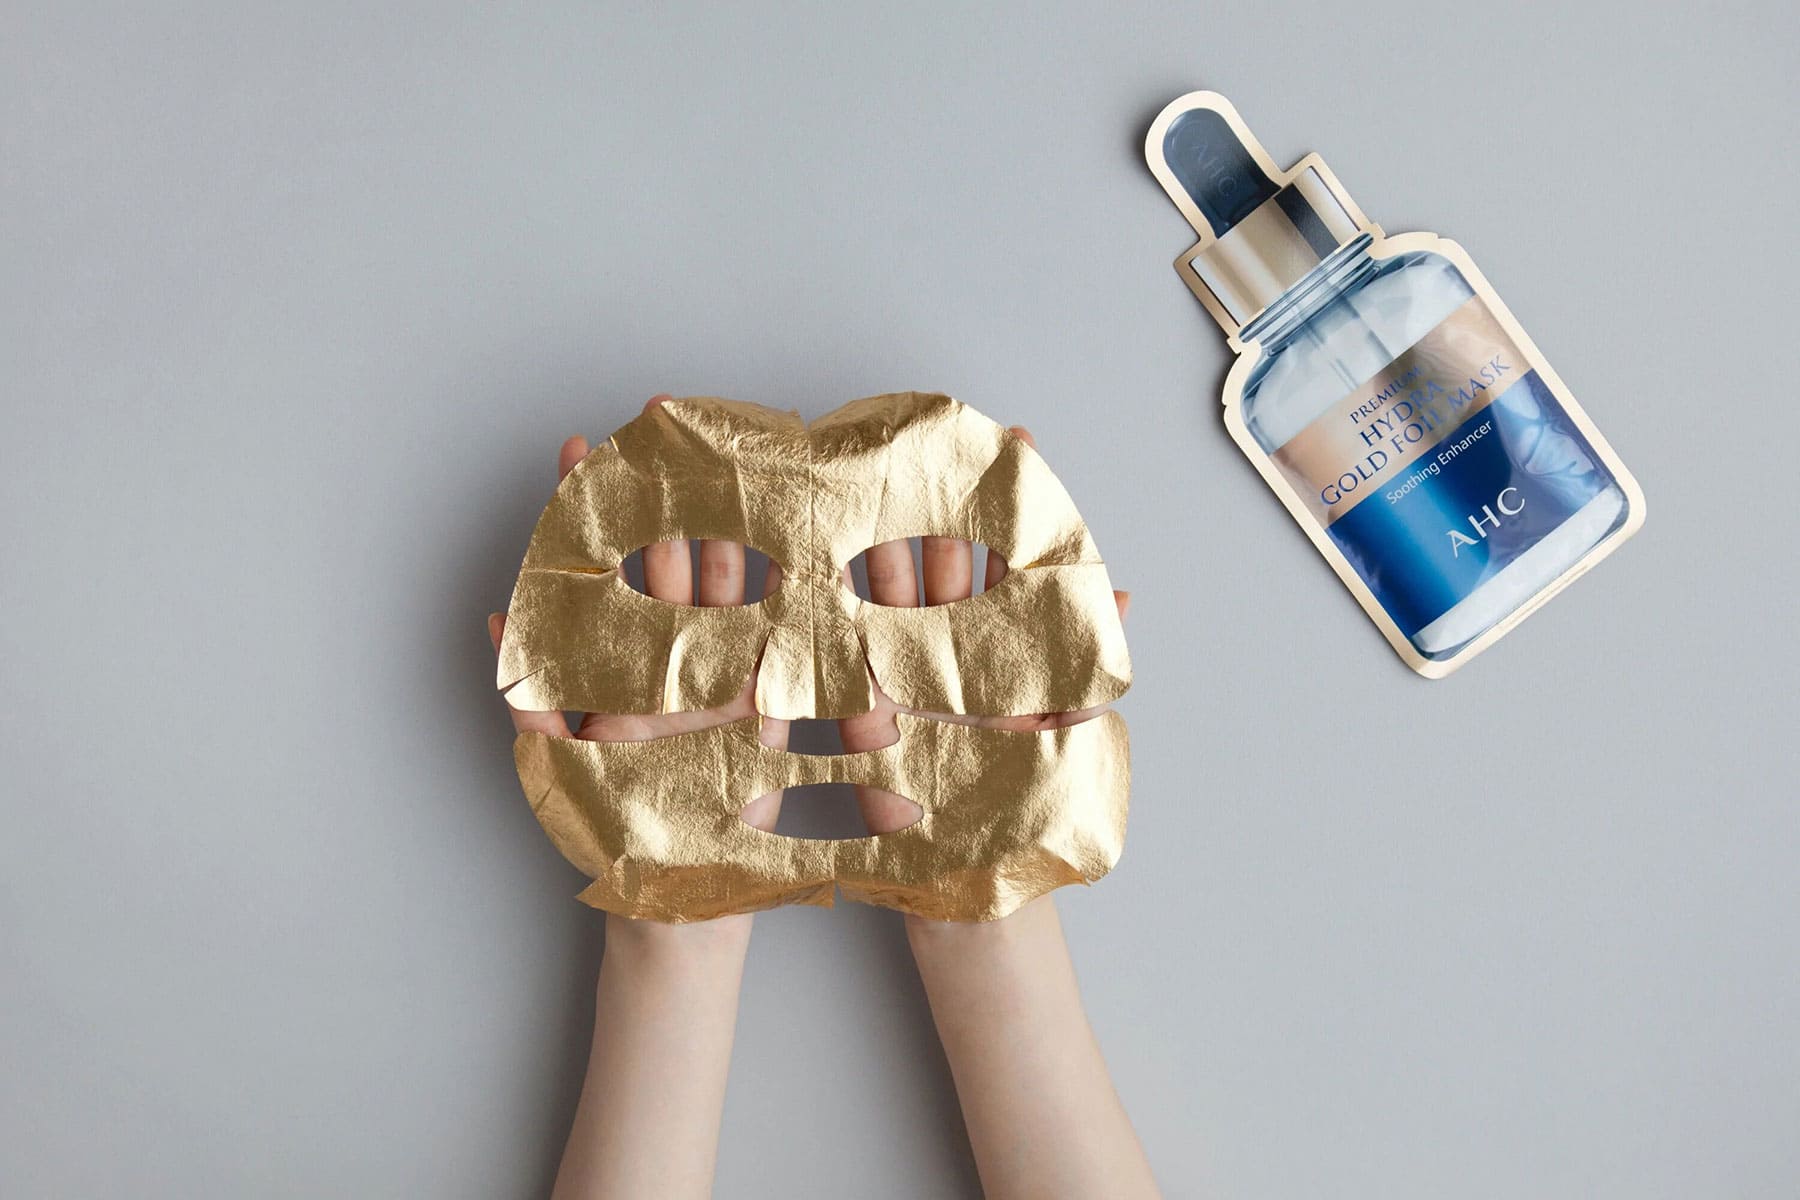 AHC - This 3 layered Gold Foil Mask from AHC is jam packed with ingredients to keep your skin hydrated.